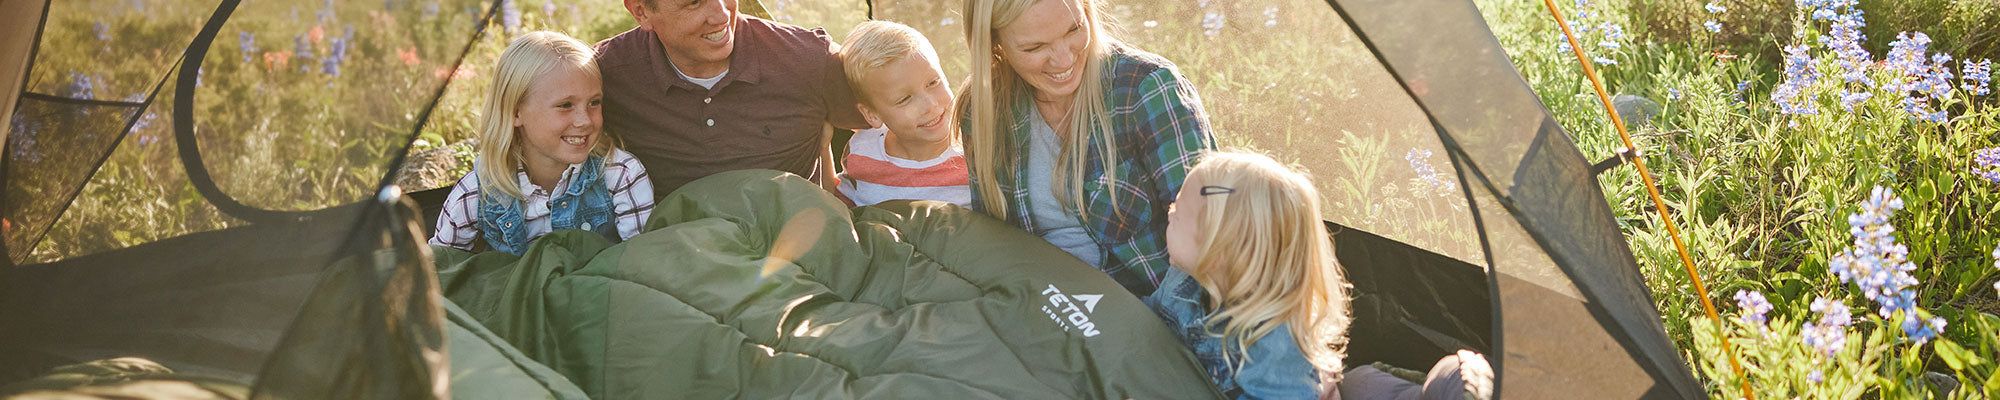 A family snuggled in their Celsius Mammoth sleeping bag.